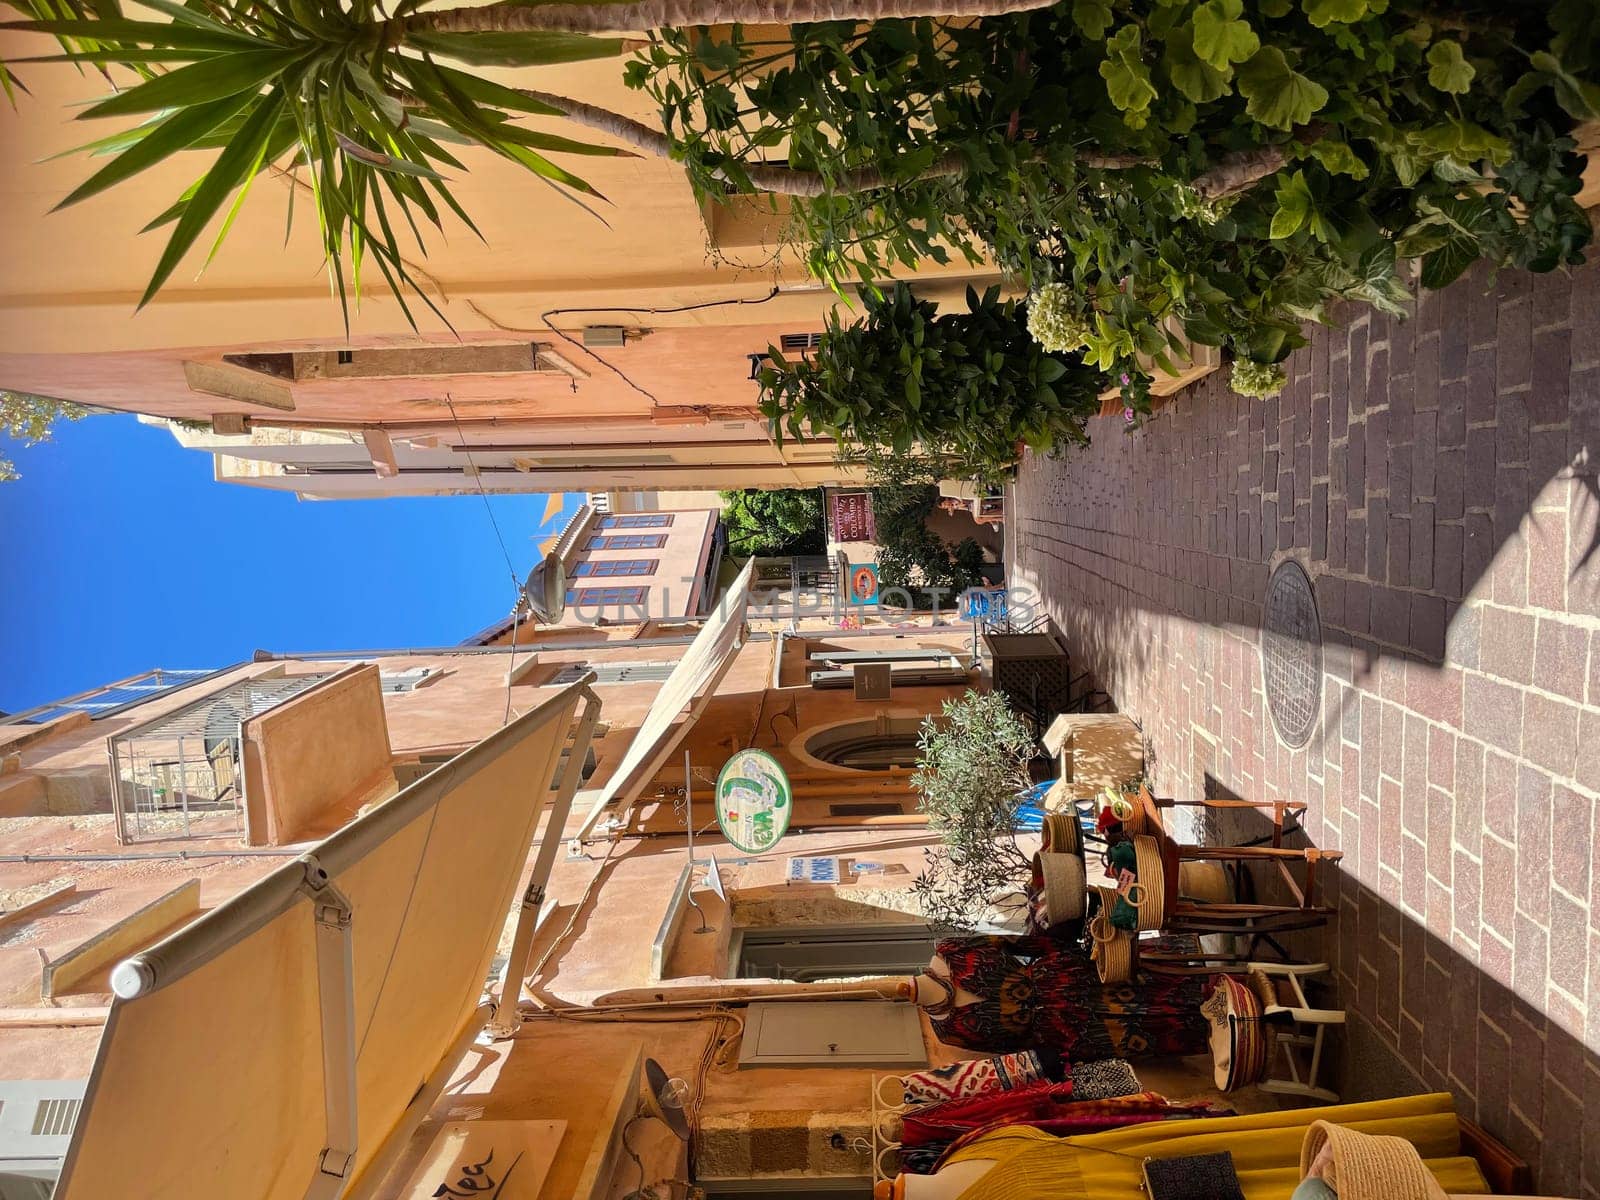 Beautiful old buildings, streets, stairs and alley ways in the town of Chania, Greece at 10 August 2023 by Costin